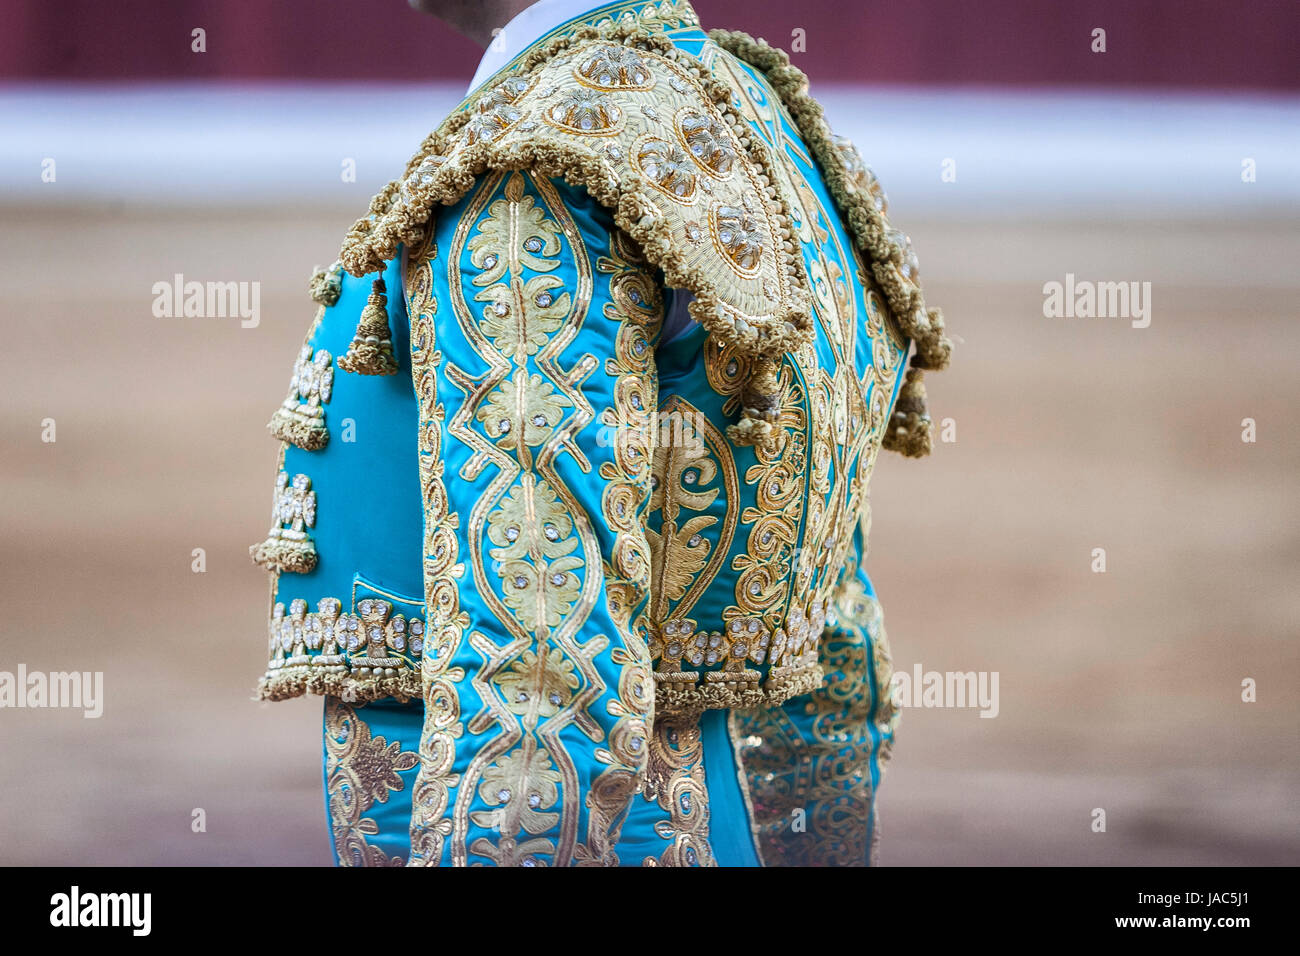 Detail of the 'traje de luces' or bullfighter dress, Spain Stock Photo